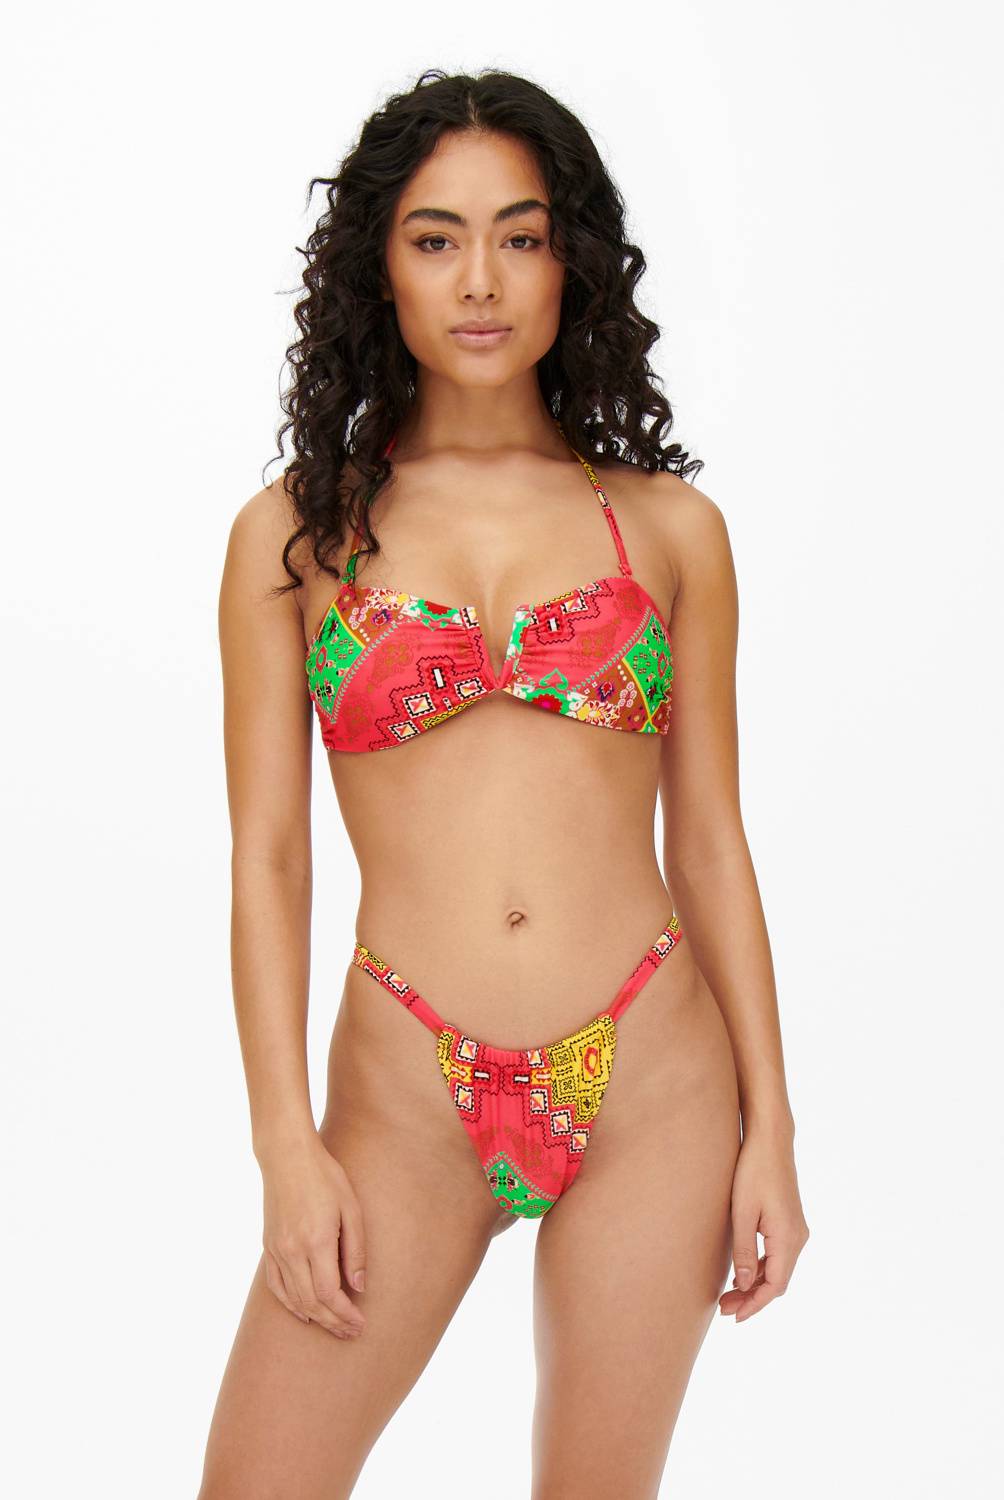 ONLY - Top Bikini Mujer Only